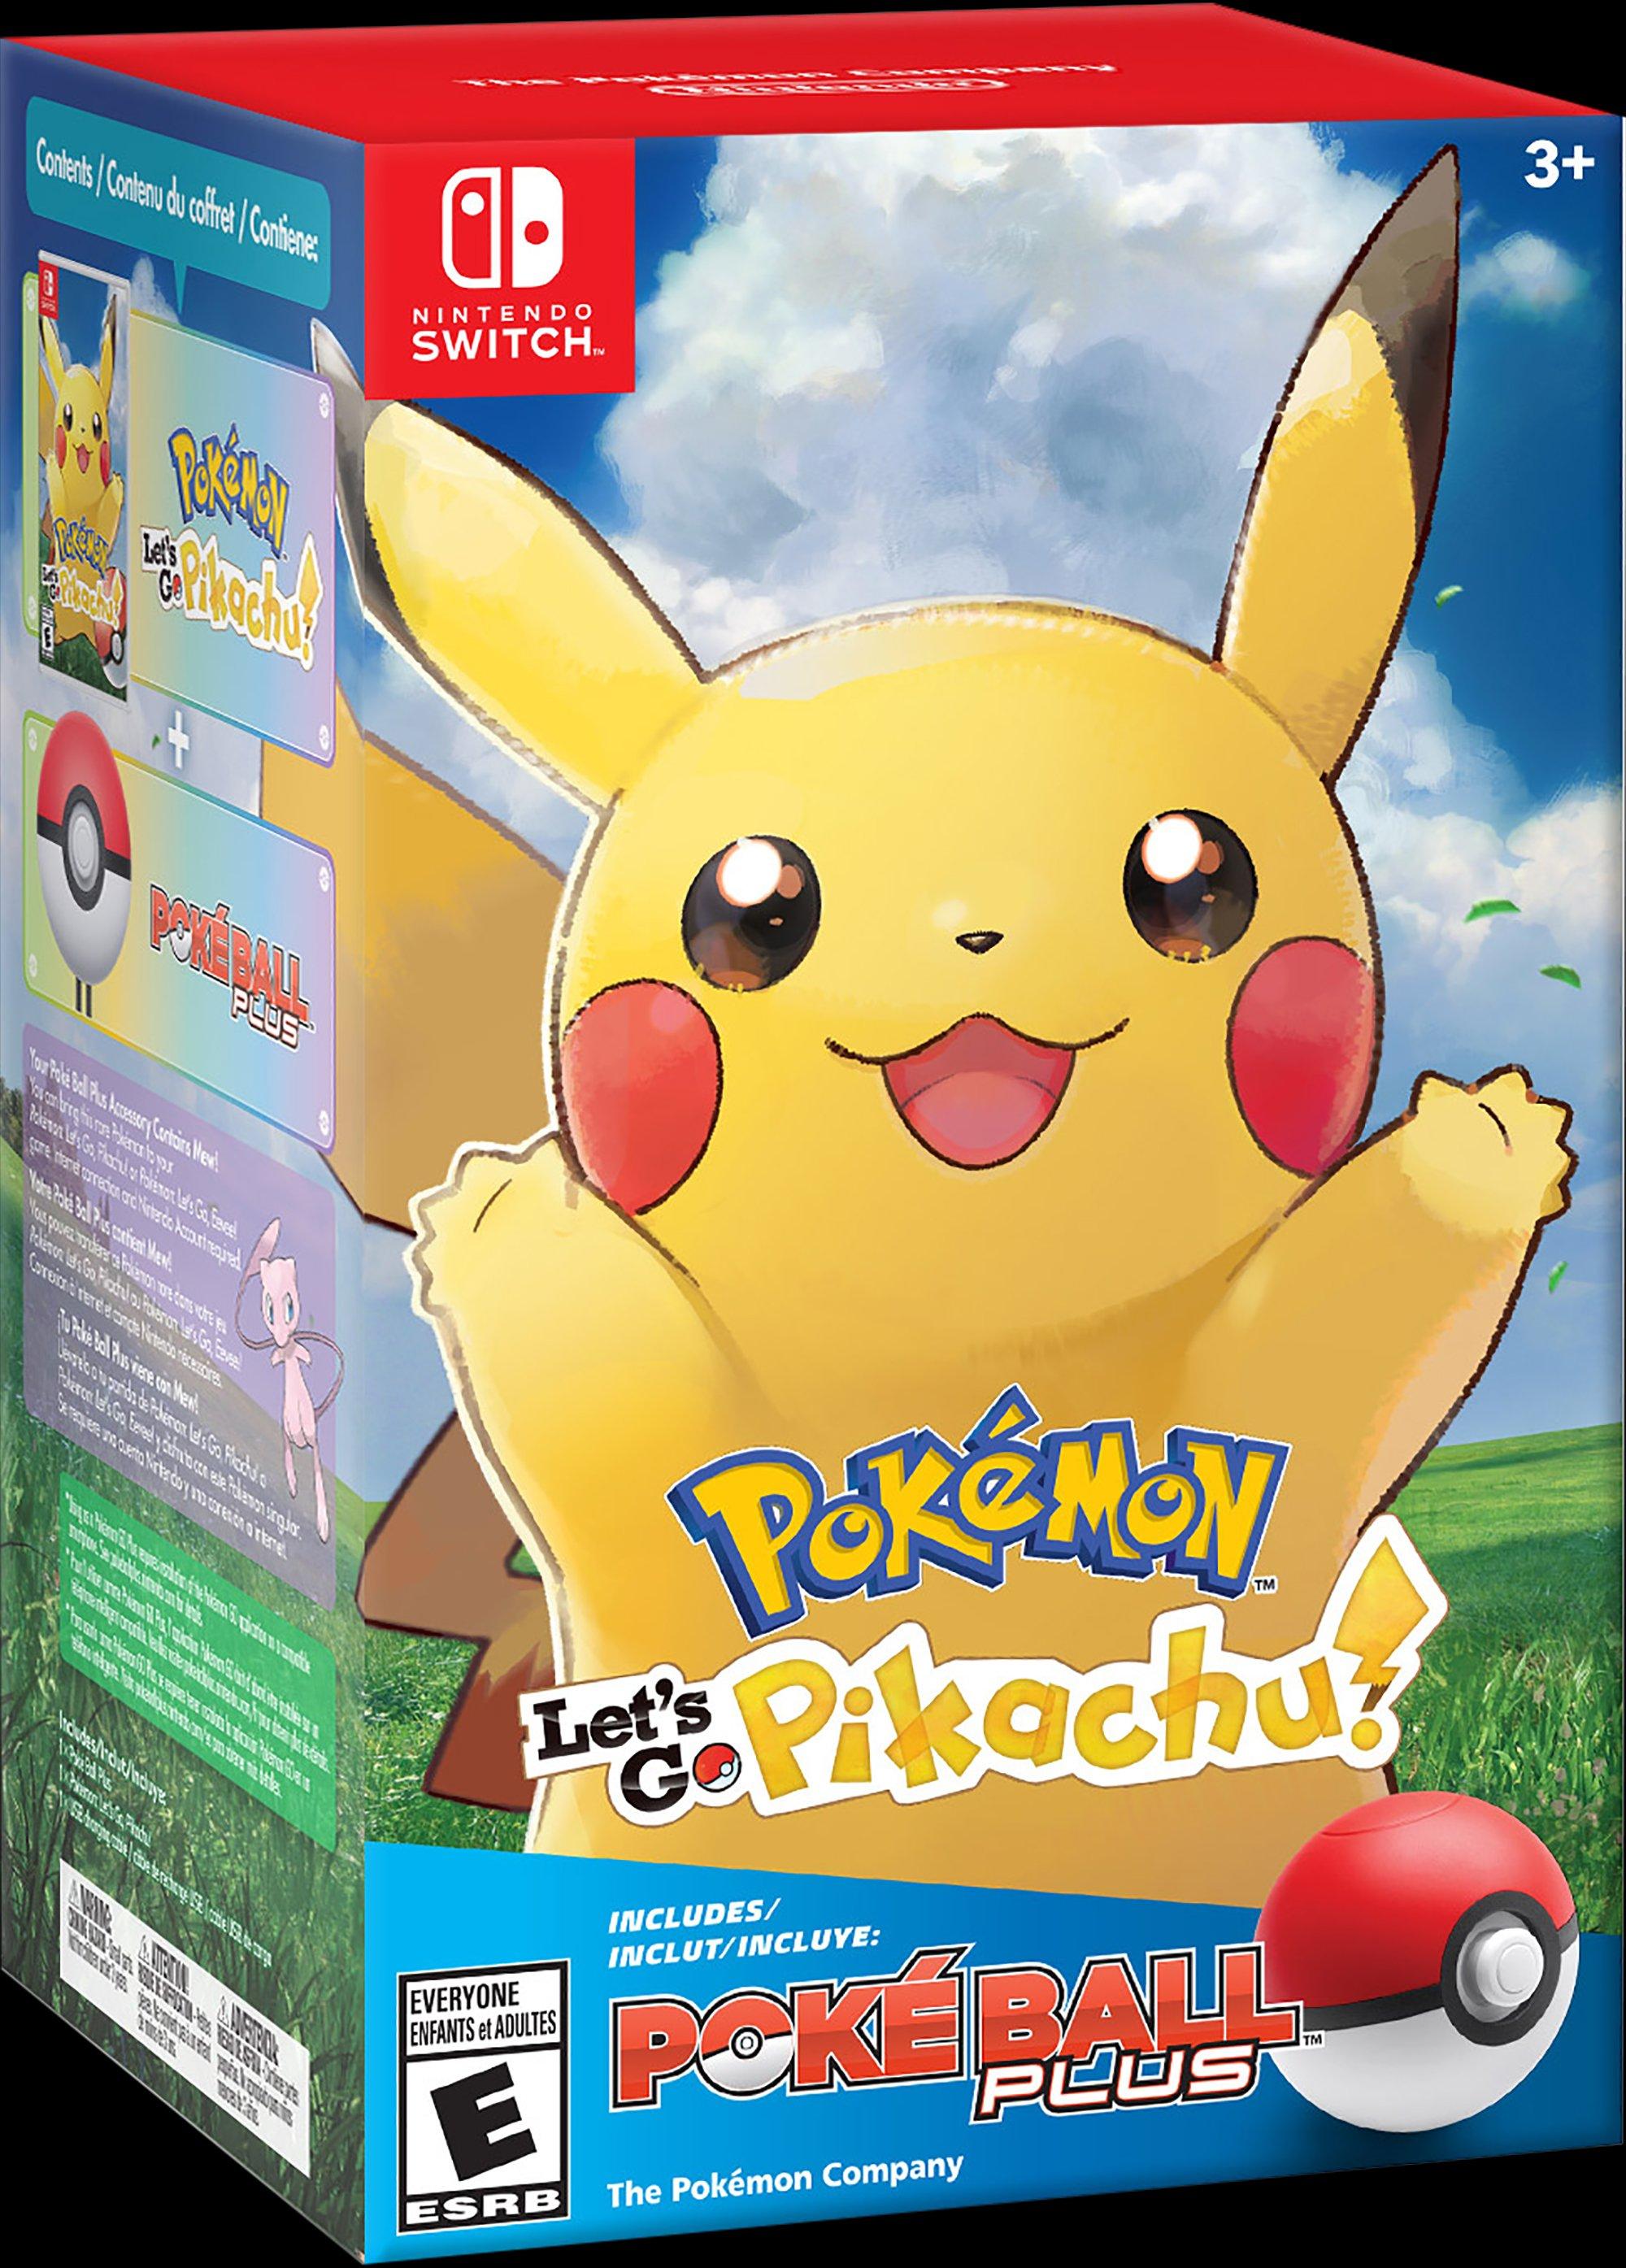 Pokémon Lets Go Pikachu Is A Cute But Casual Cash In On